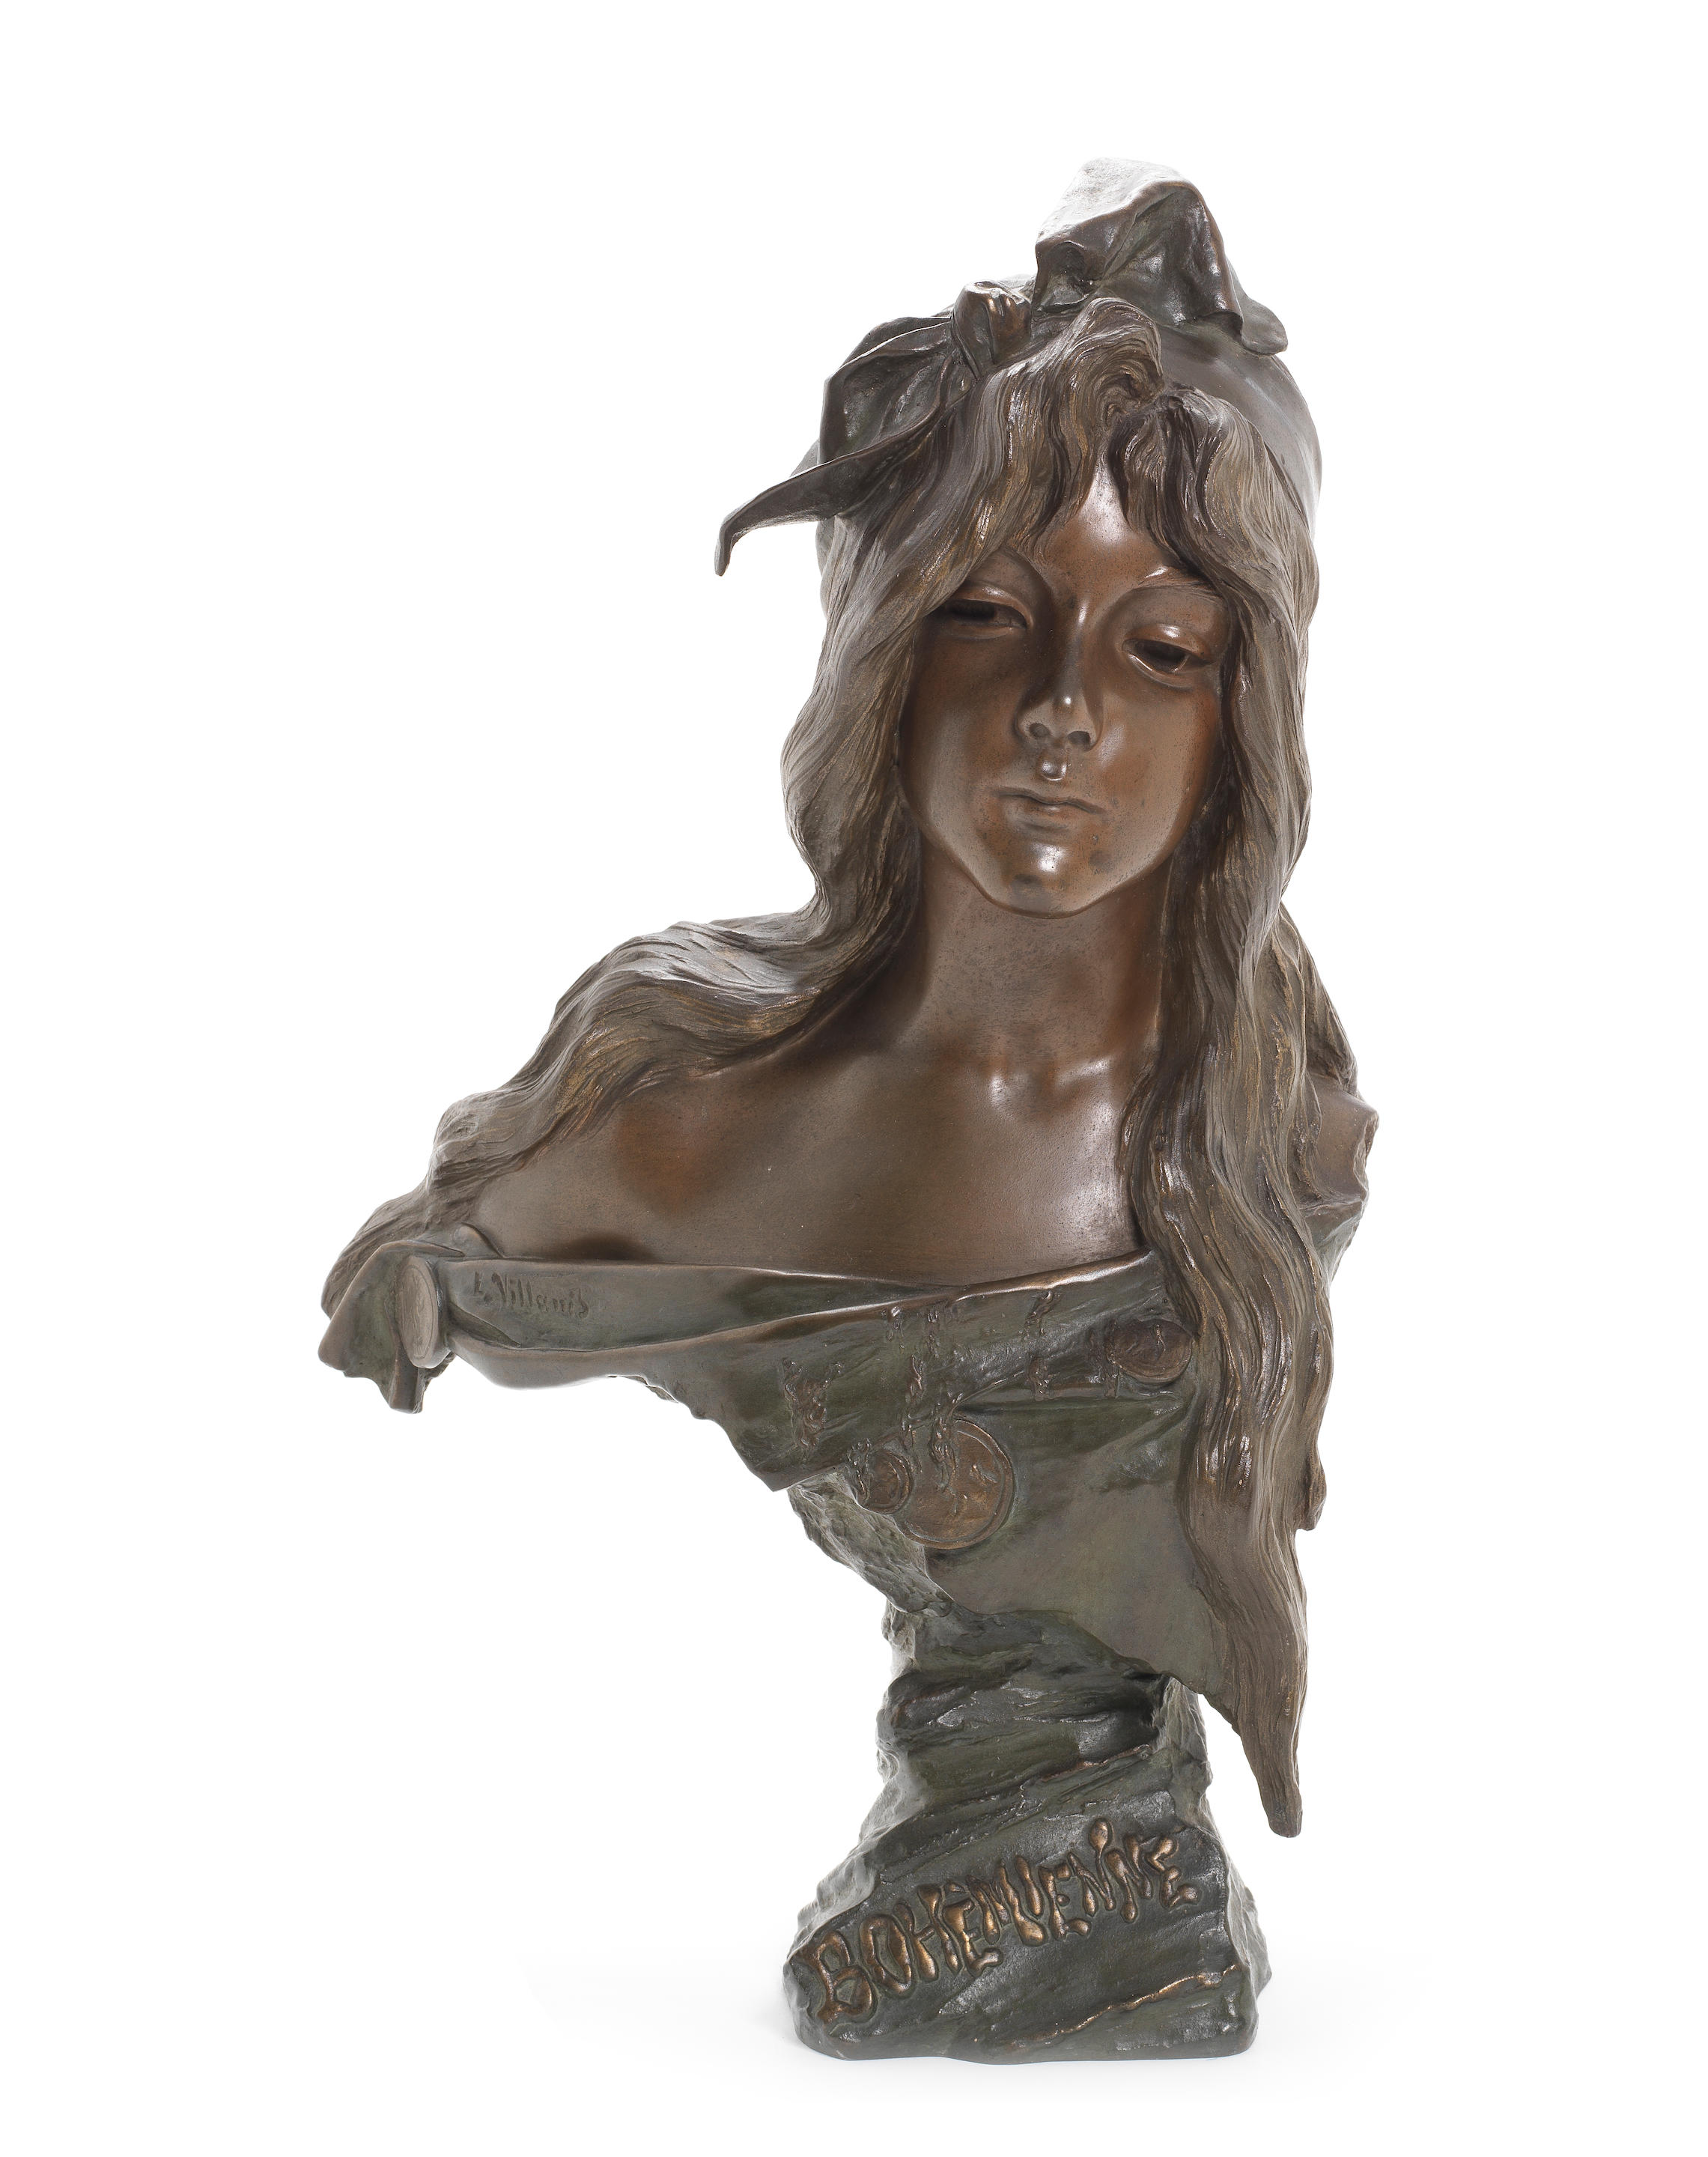 Bust of Woman Art Nouveau Sculpture 22, Bust Head and Shoulders of